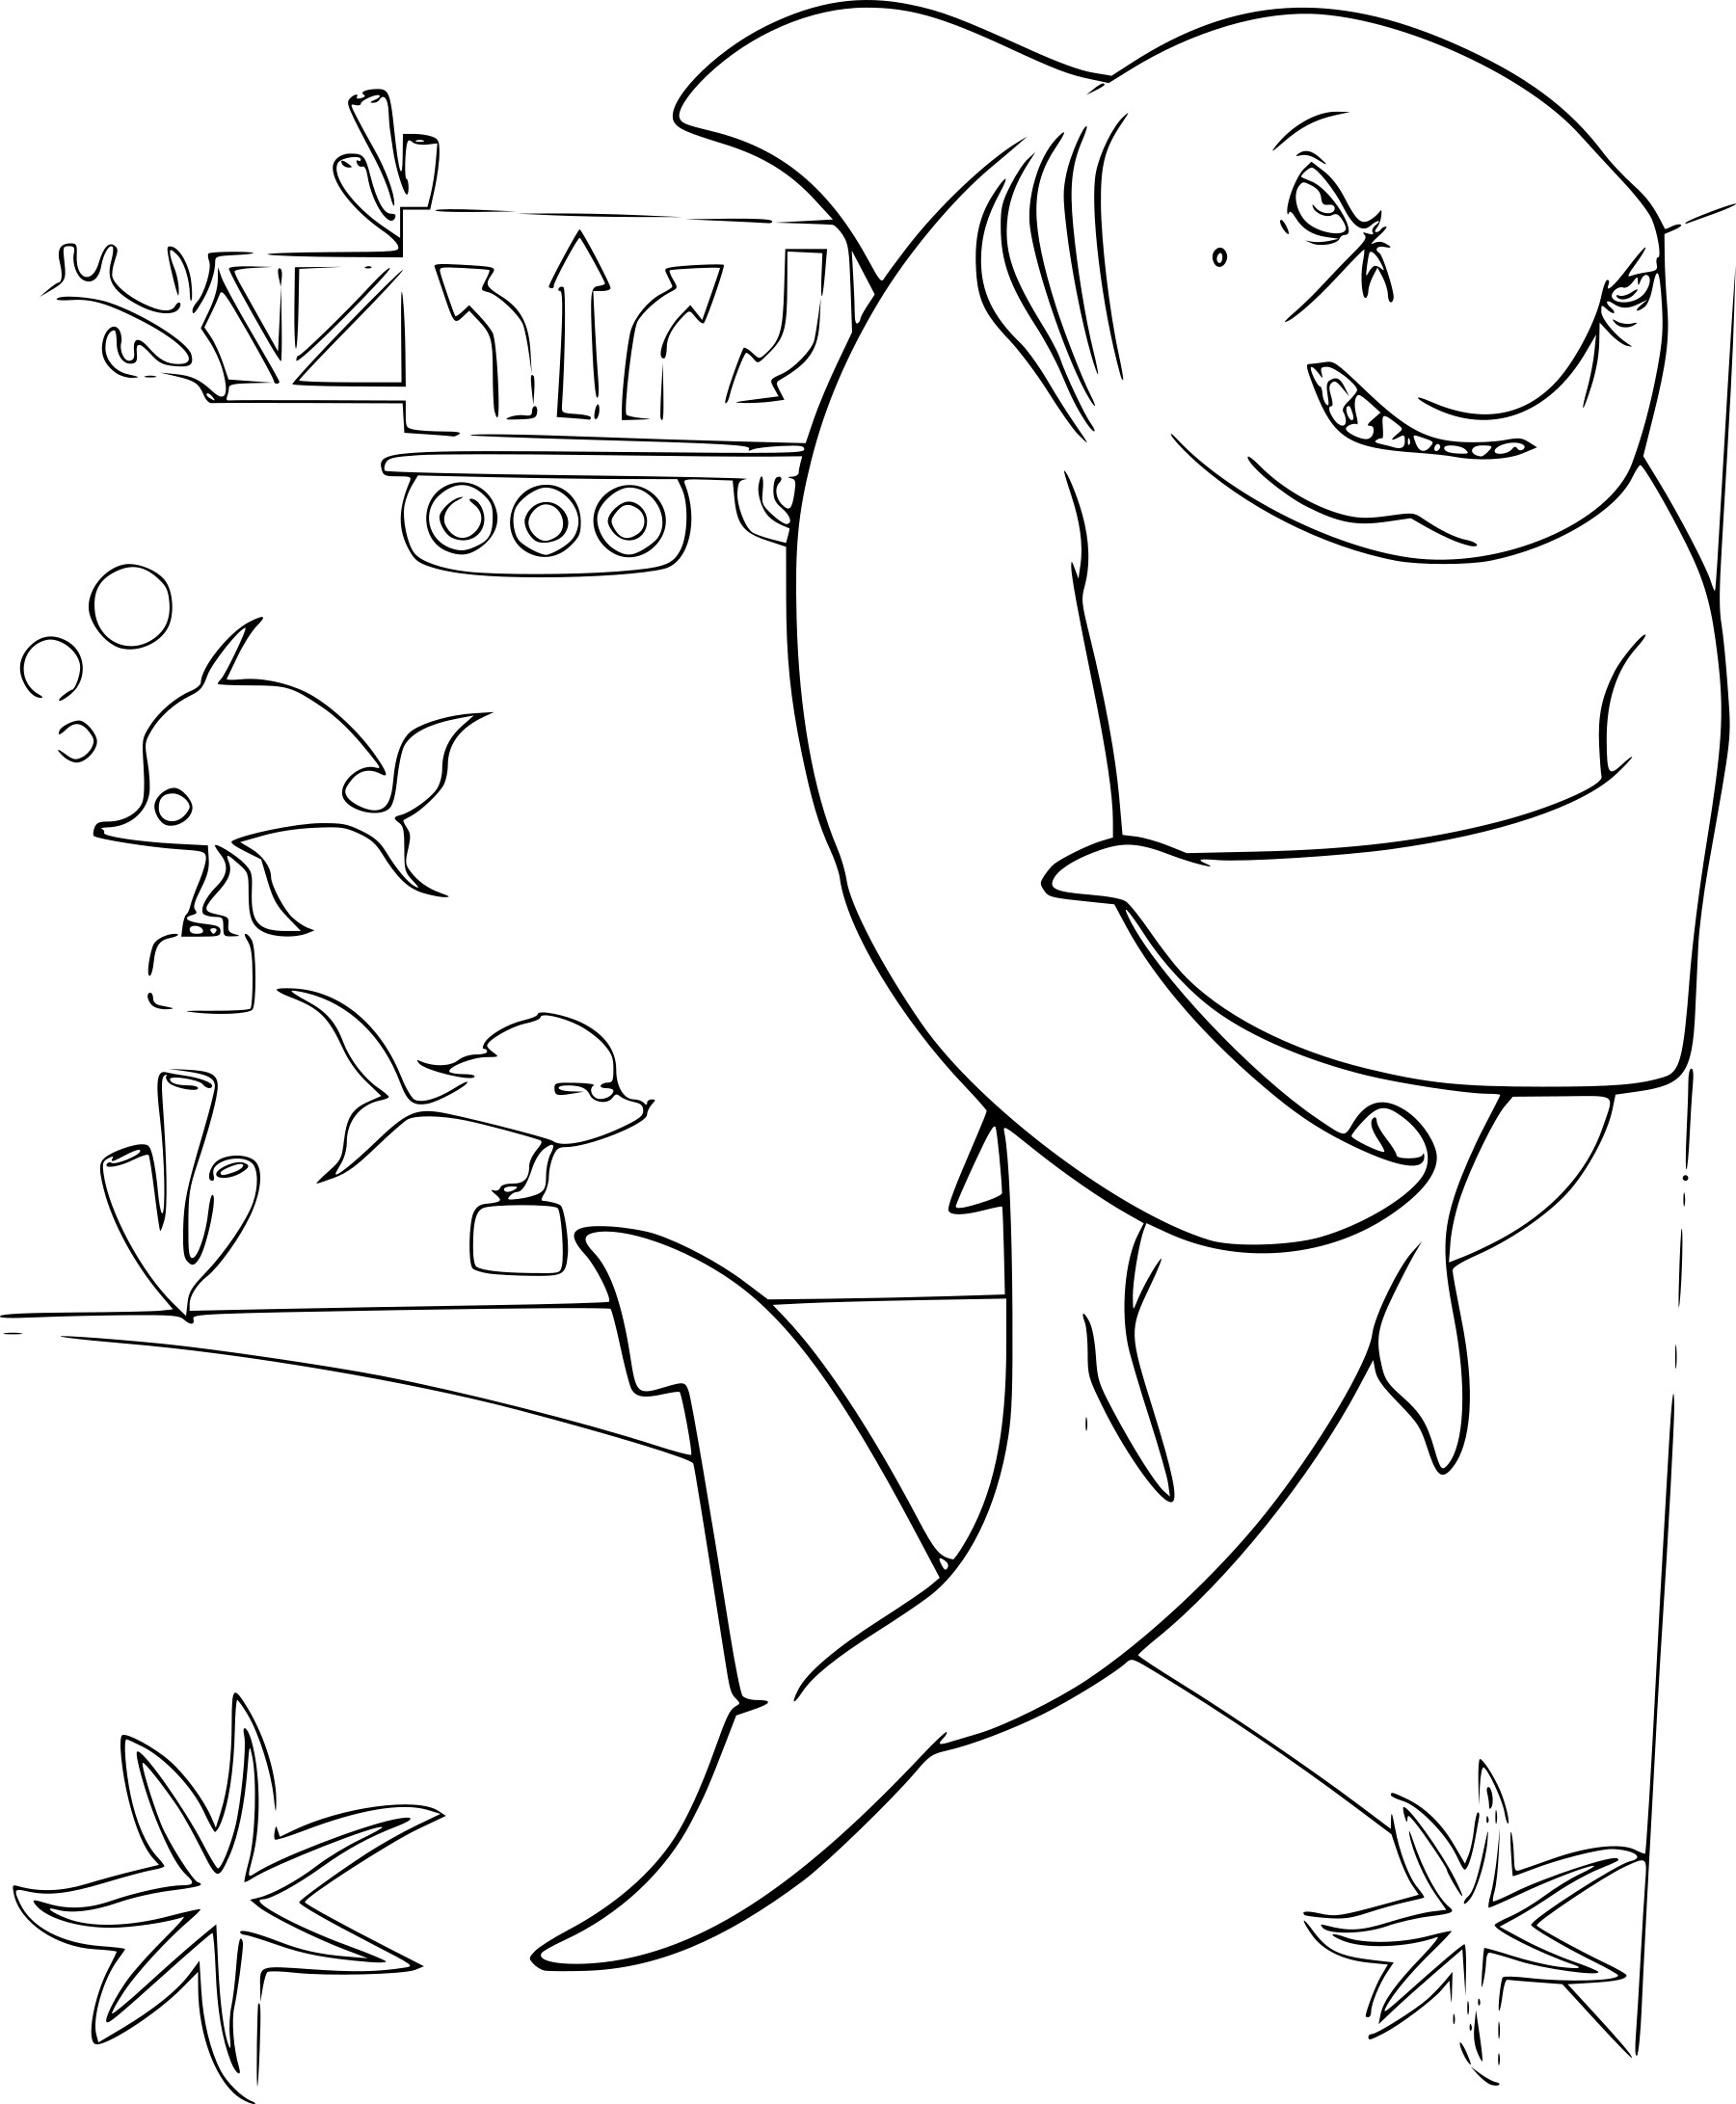 Gang Of Sharks coloring page